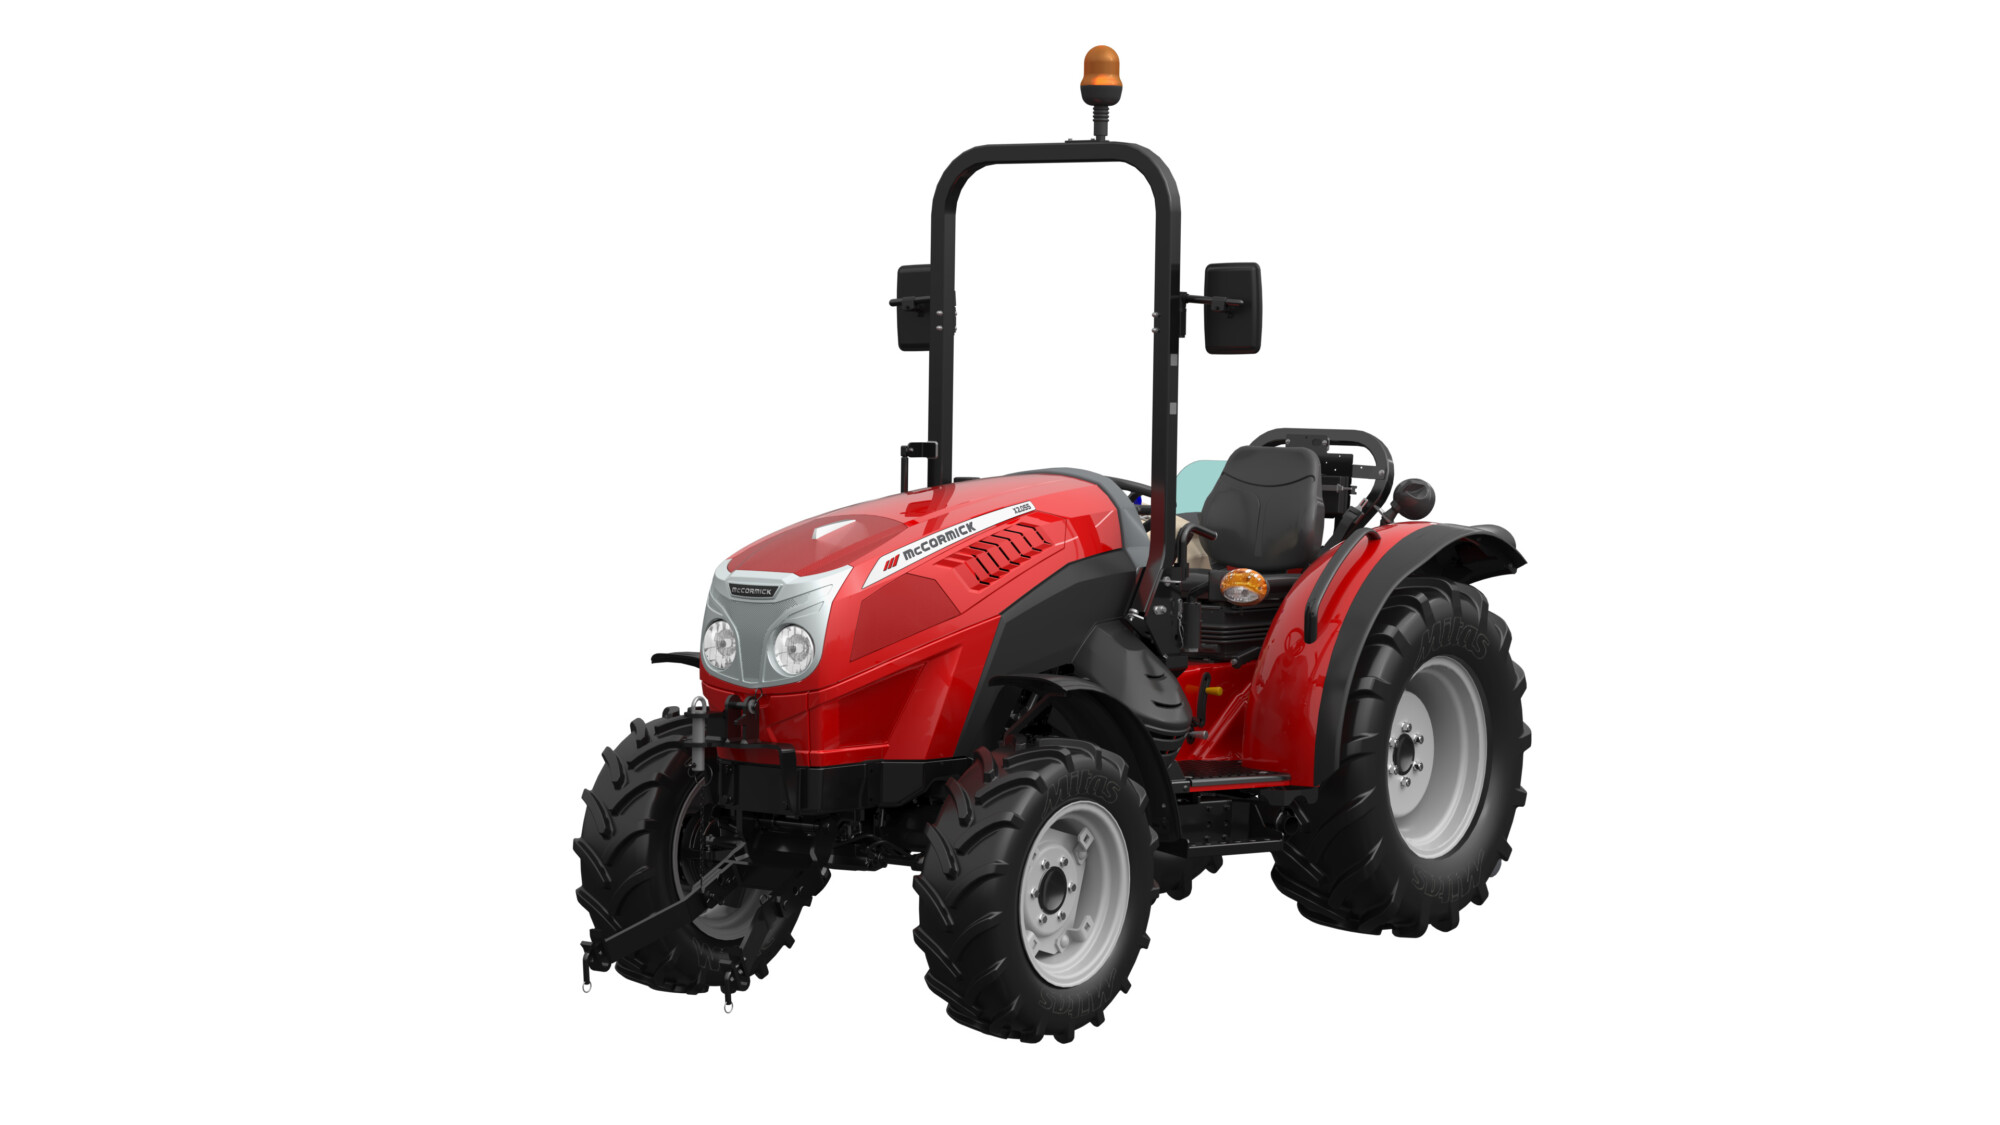 New X2 compact tractor